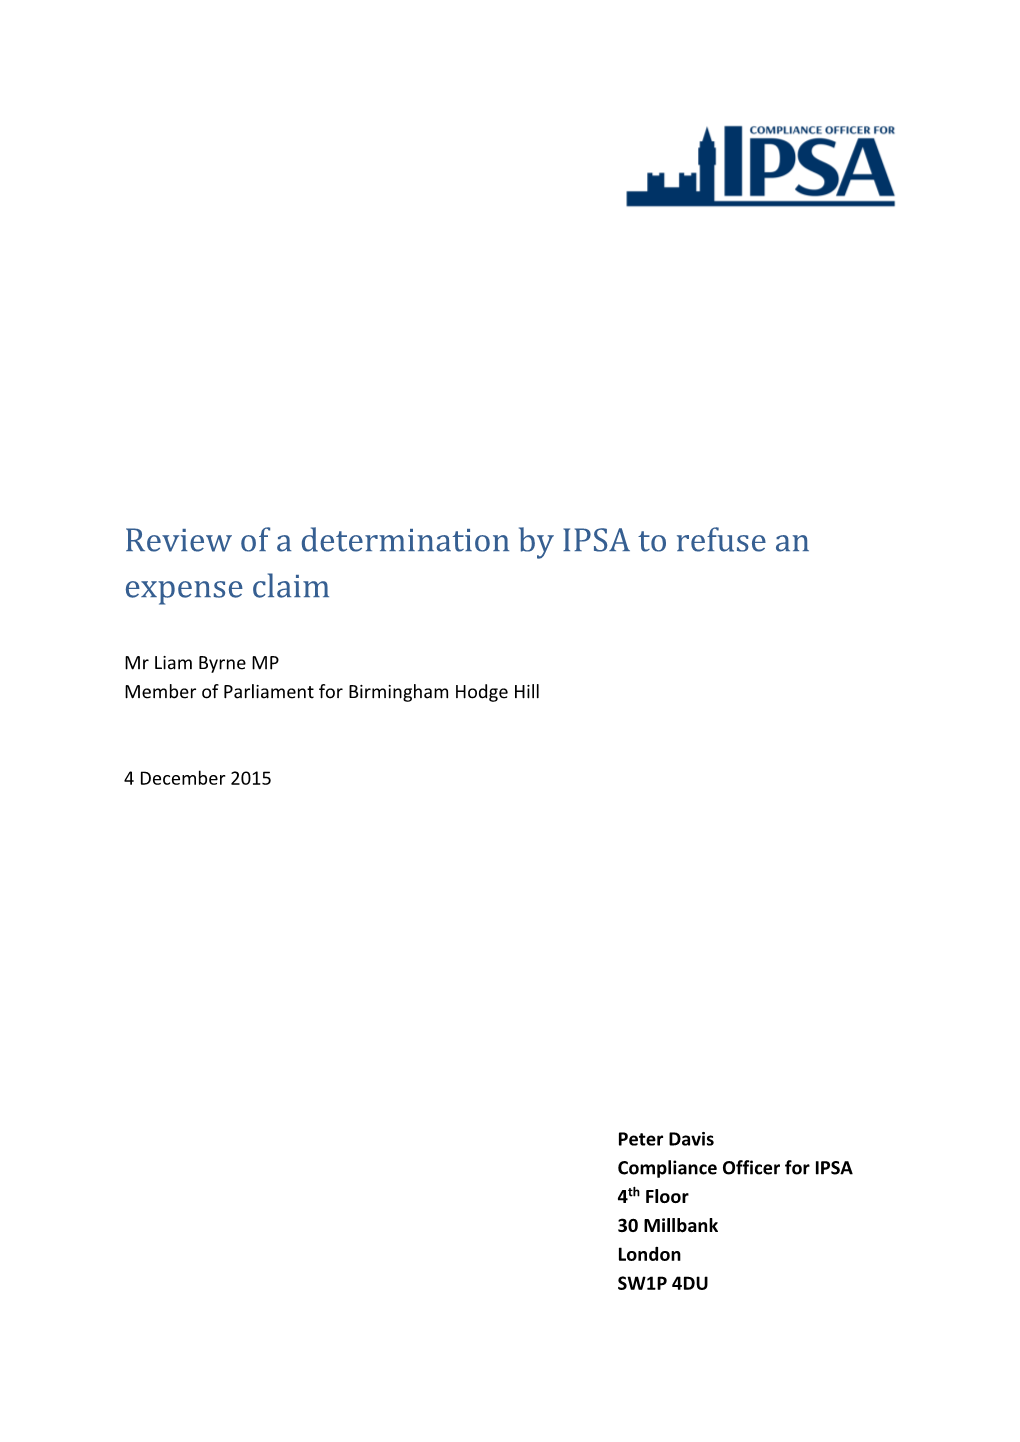 Review of a Determination by IPSA to Refuse an Expense Claim